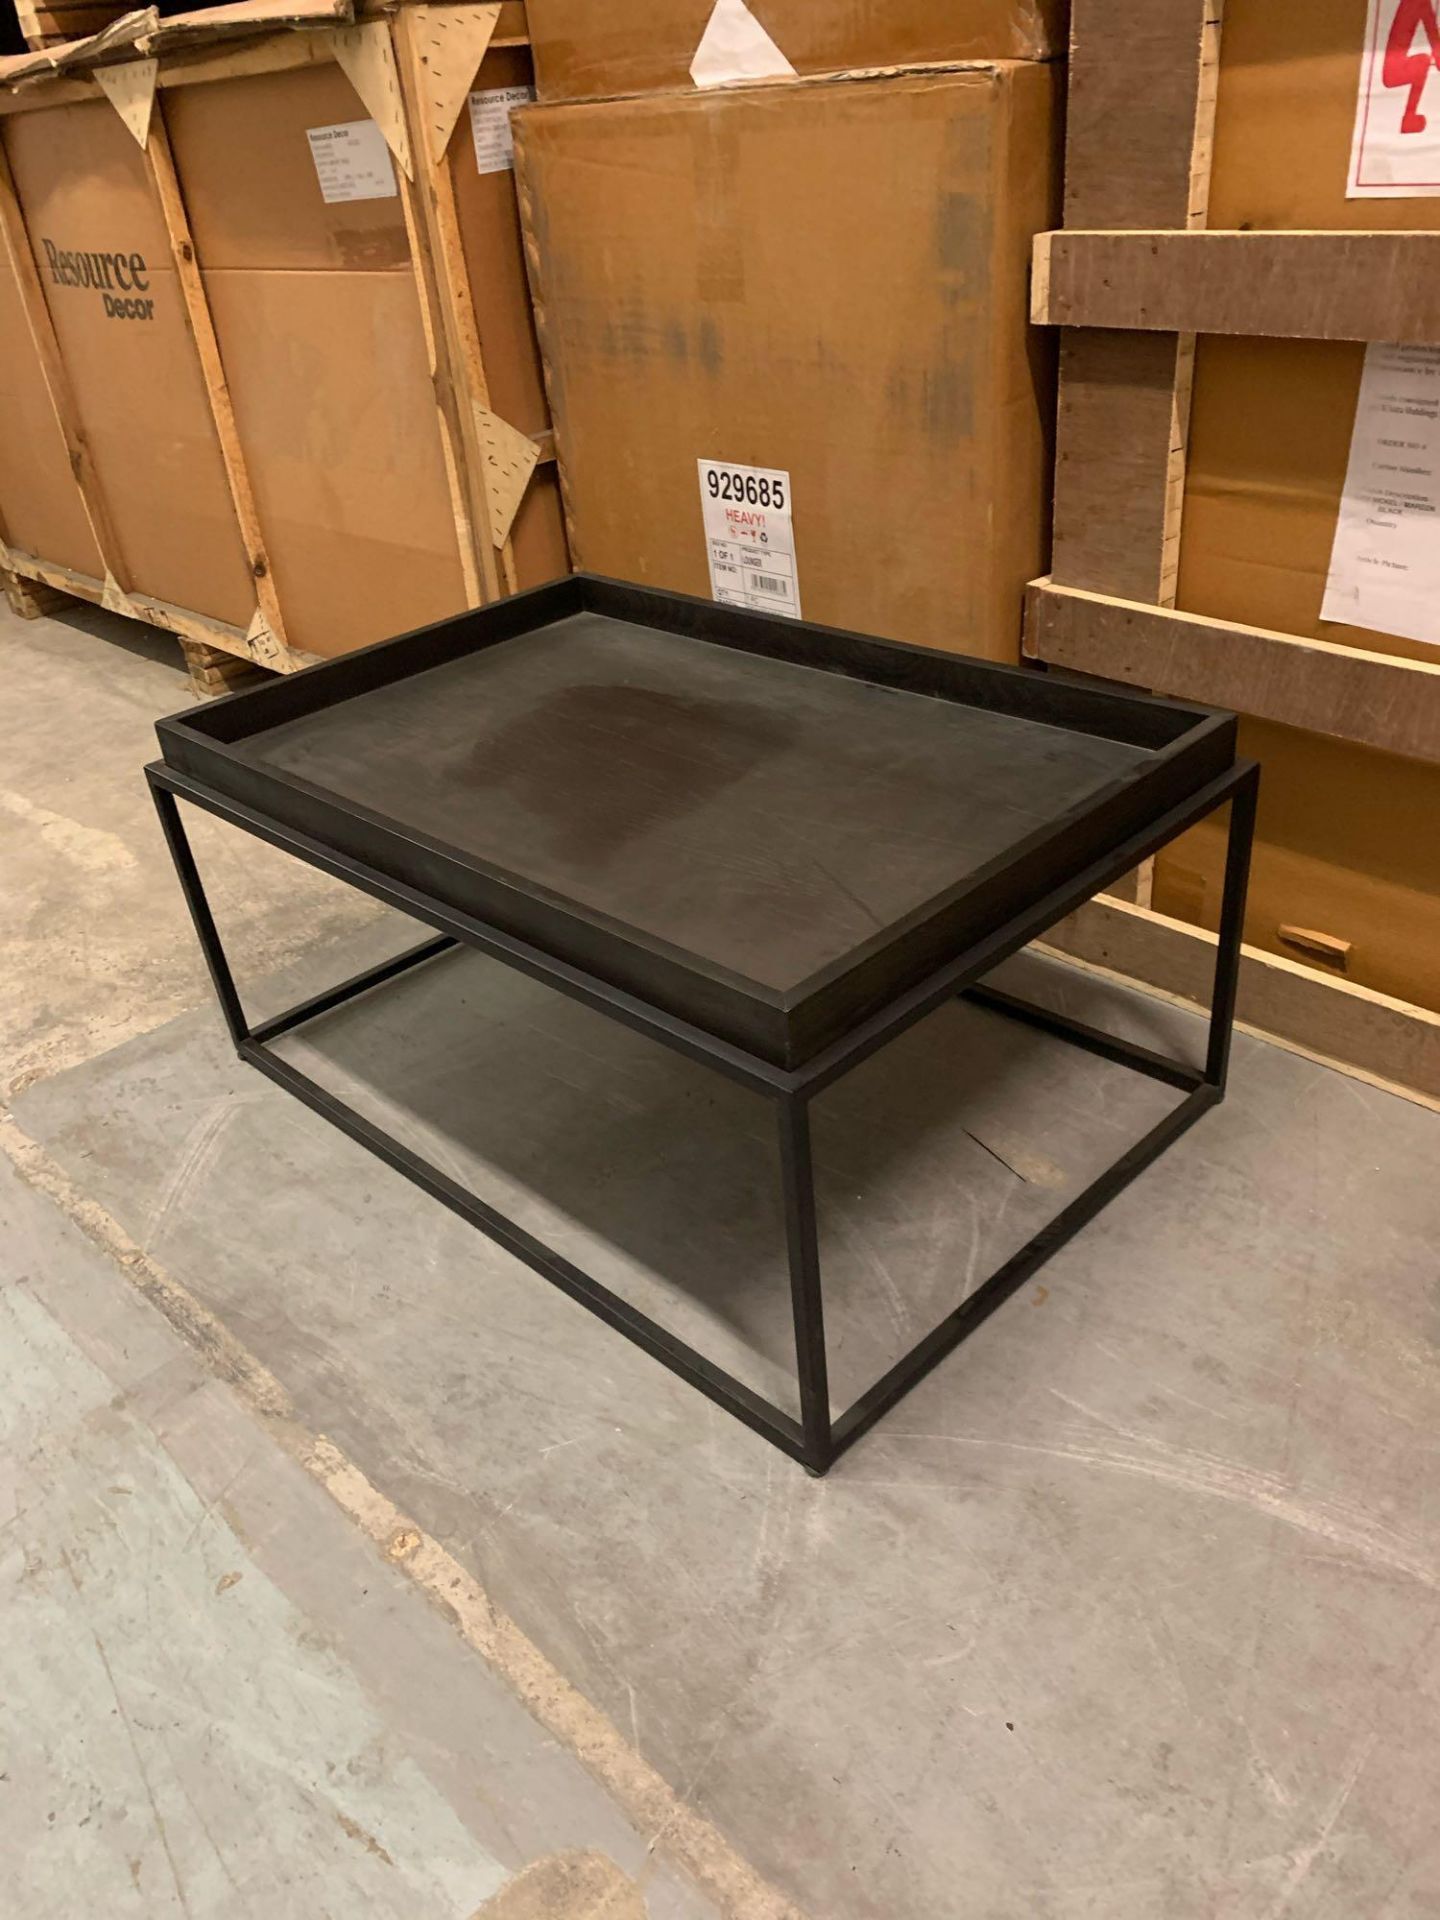 Forden Tray Coffee Table Black W900 x D600 x H400mm The Forden Black Side Table Completed With A - Bild 3 aus 5